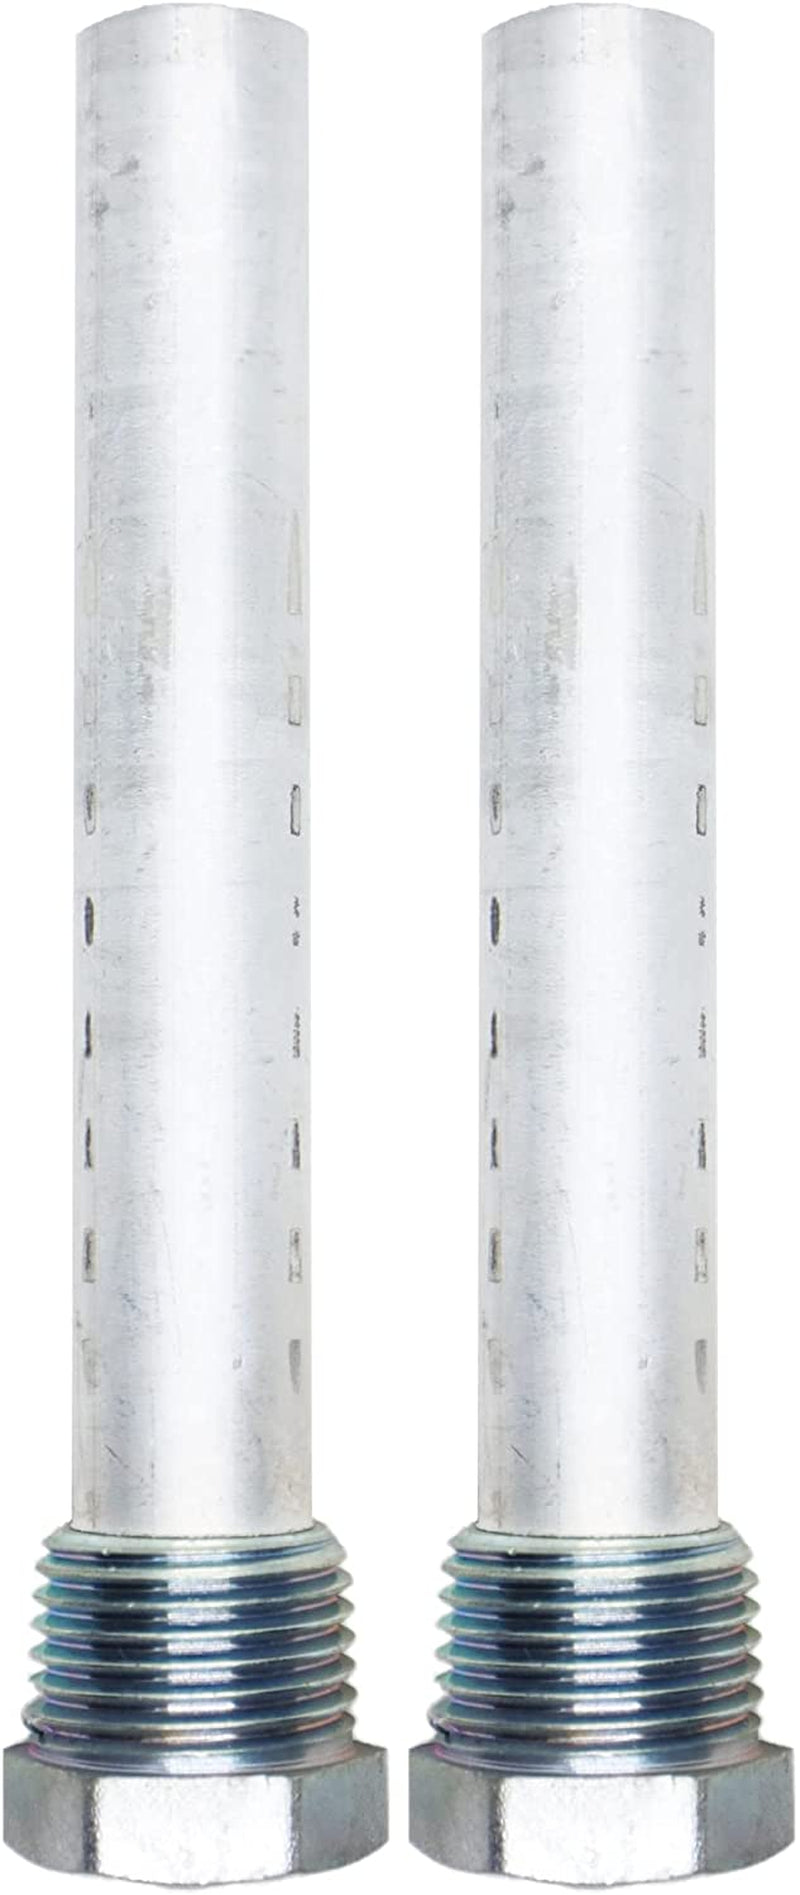 ONENESS 369 (2 Pack) Anode Rod for RV Water Heater Atwood Dometic Replacement Part 11553 - Size 4.5 in X 1/2 in NPT - Magnesium - 1 Year Warranty Sporting Goods > Outdoor Recreation > Fishing > Fishing Rods ONENESS 369 Atwood - 4.5”L x 1/2” NPT - 2 Pack  